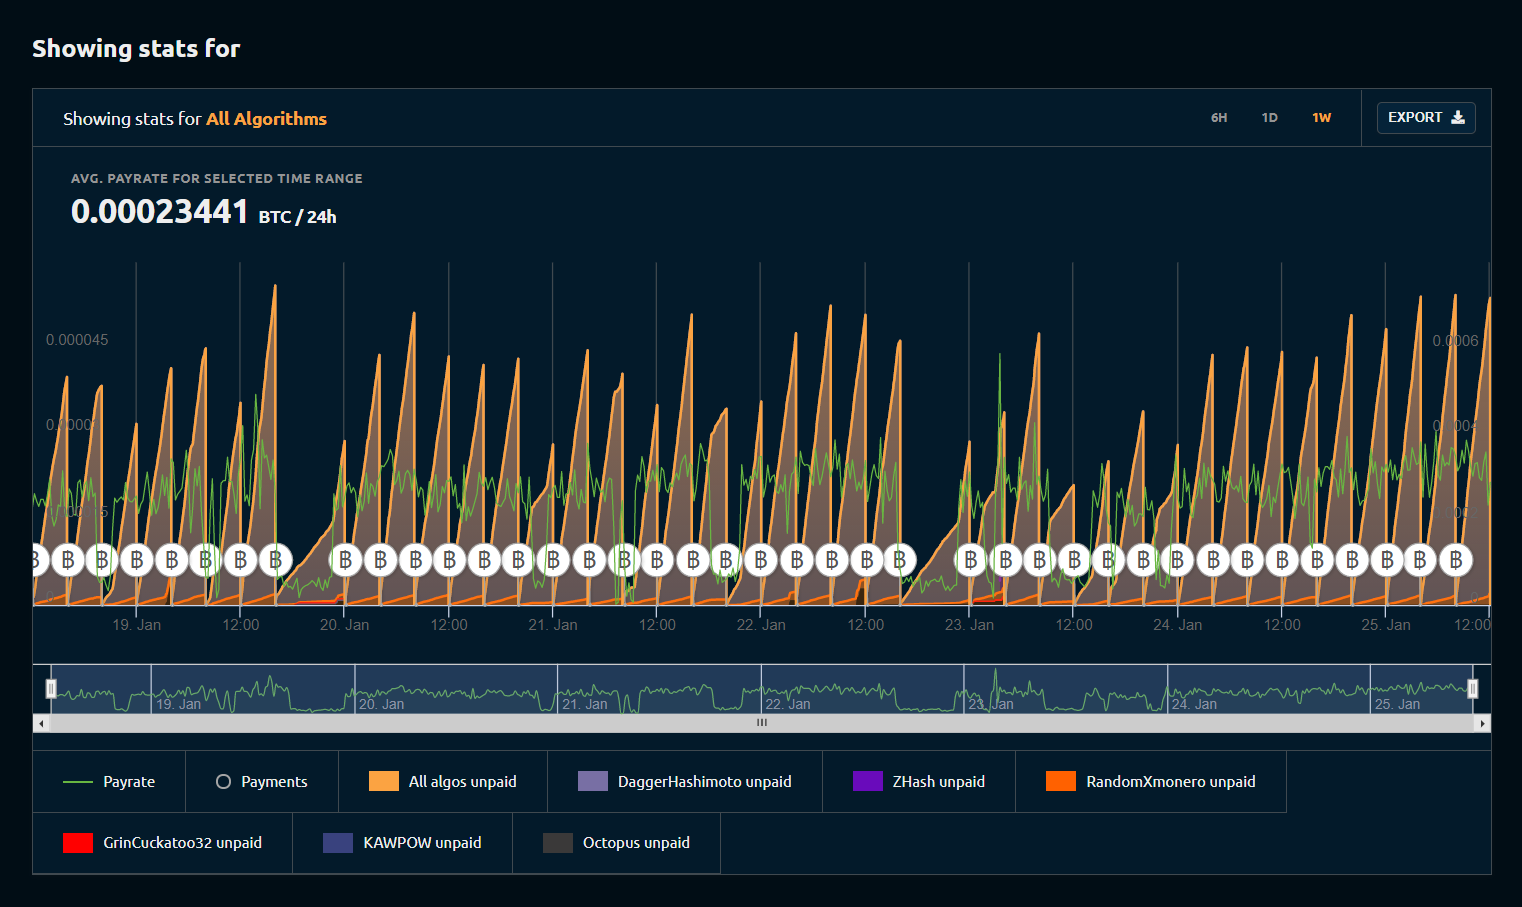 My NiceHash mining stats for the last week. A spikey chart showing average 